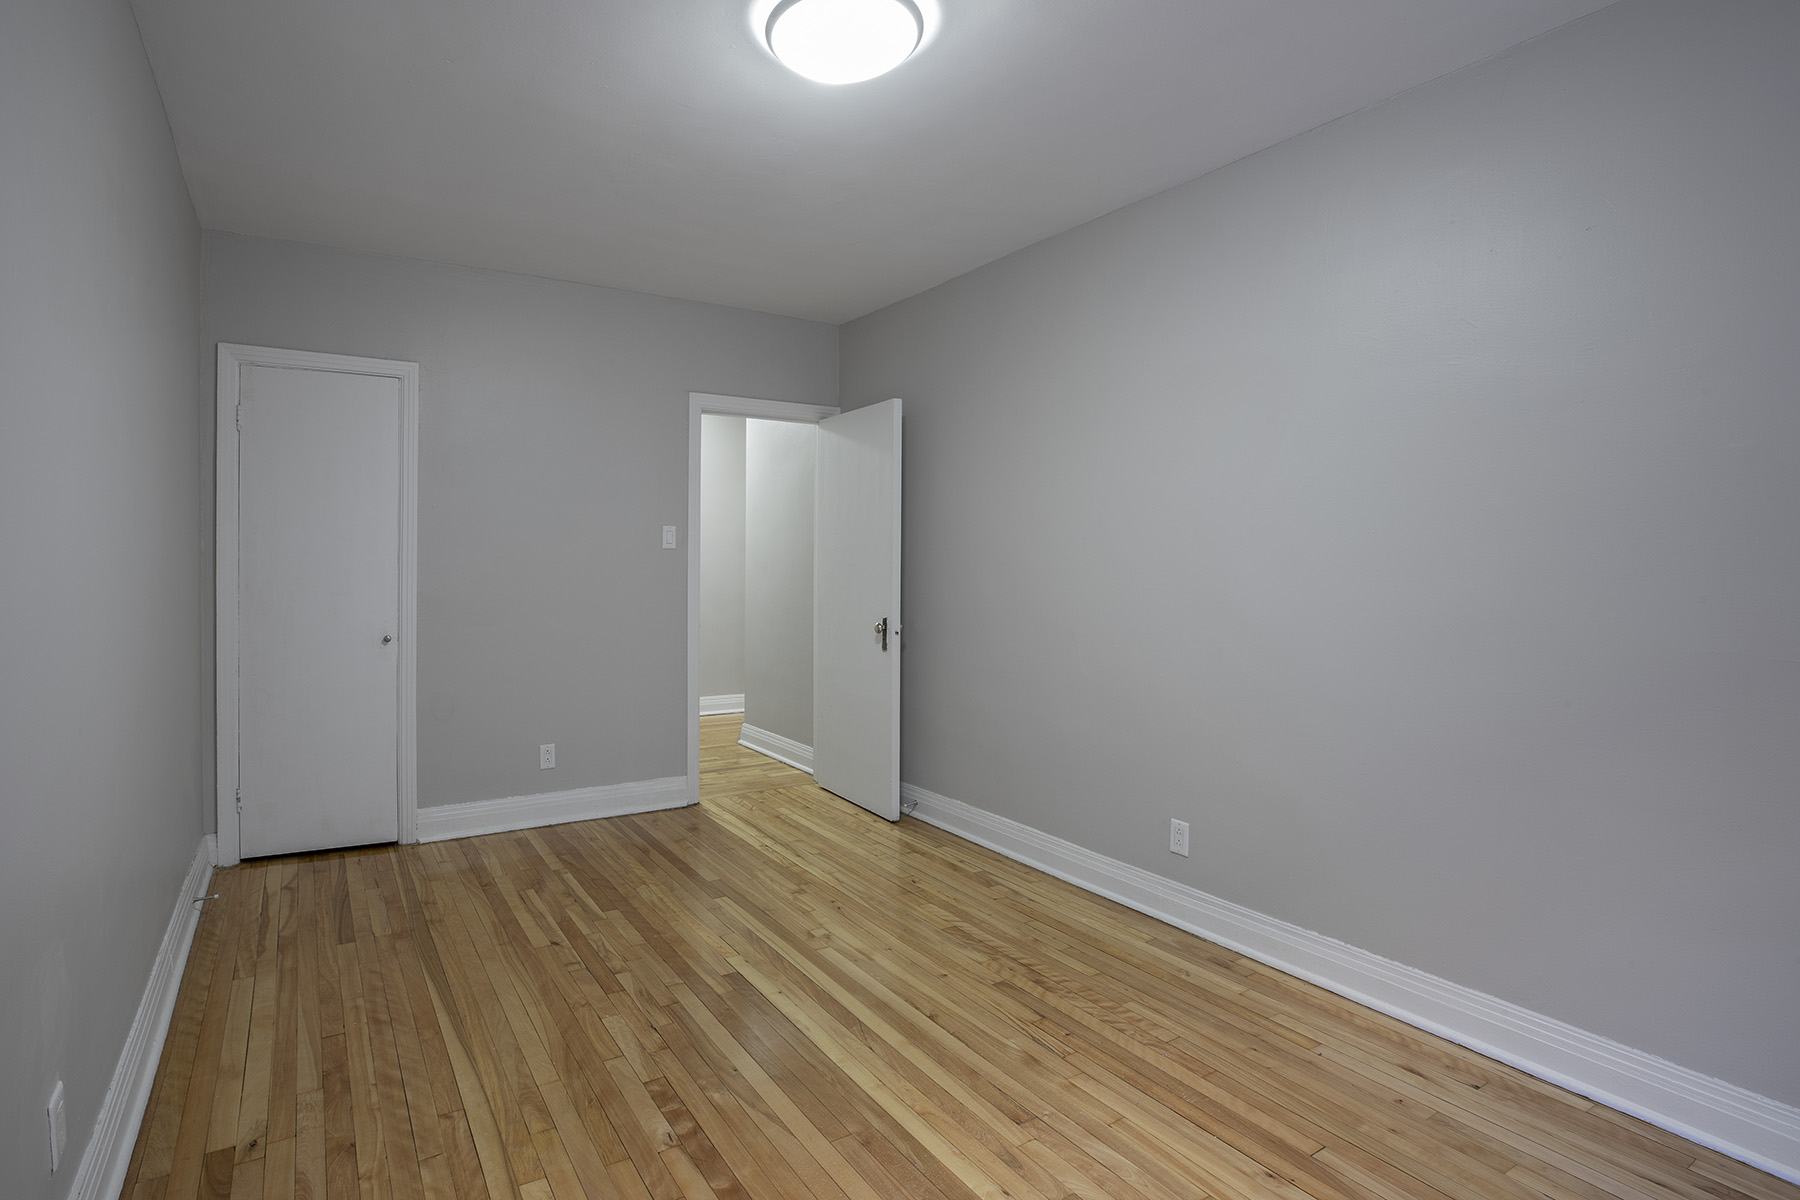 3 bedroom Apartments for rent in Cote-des-Neiges at 5000 Clanranald - Photo 06 - RentQuebecApartments – L401549